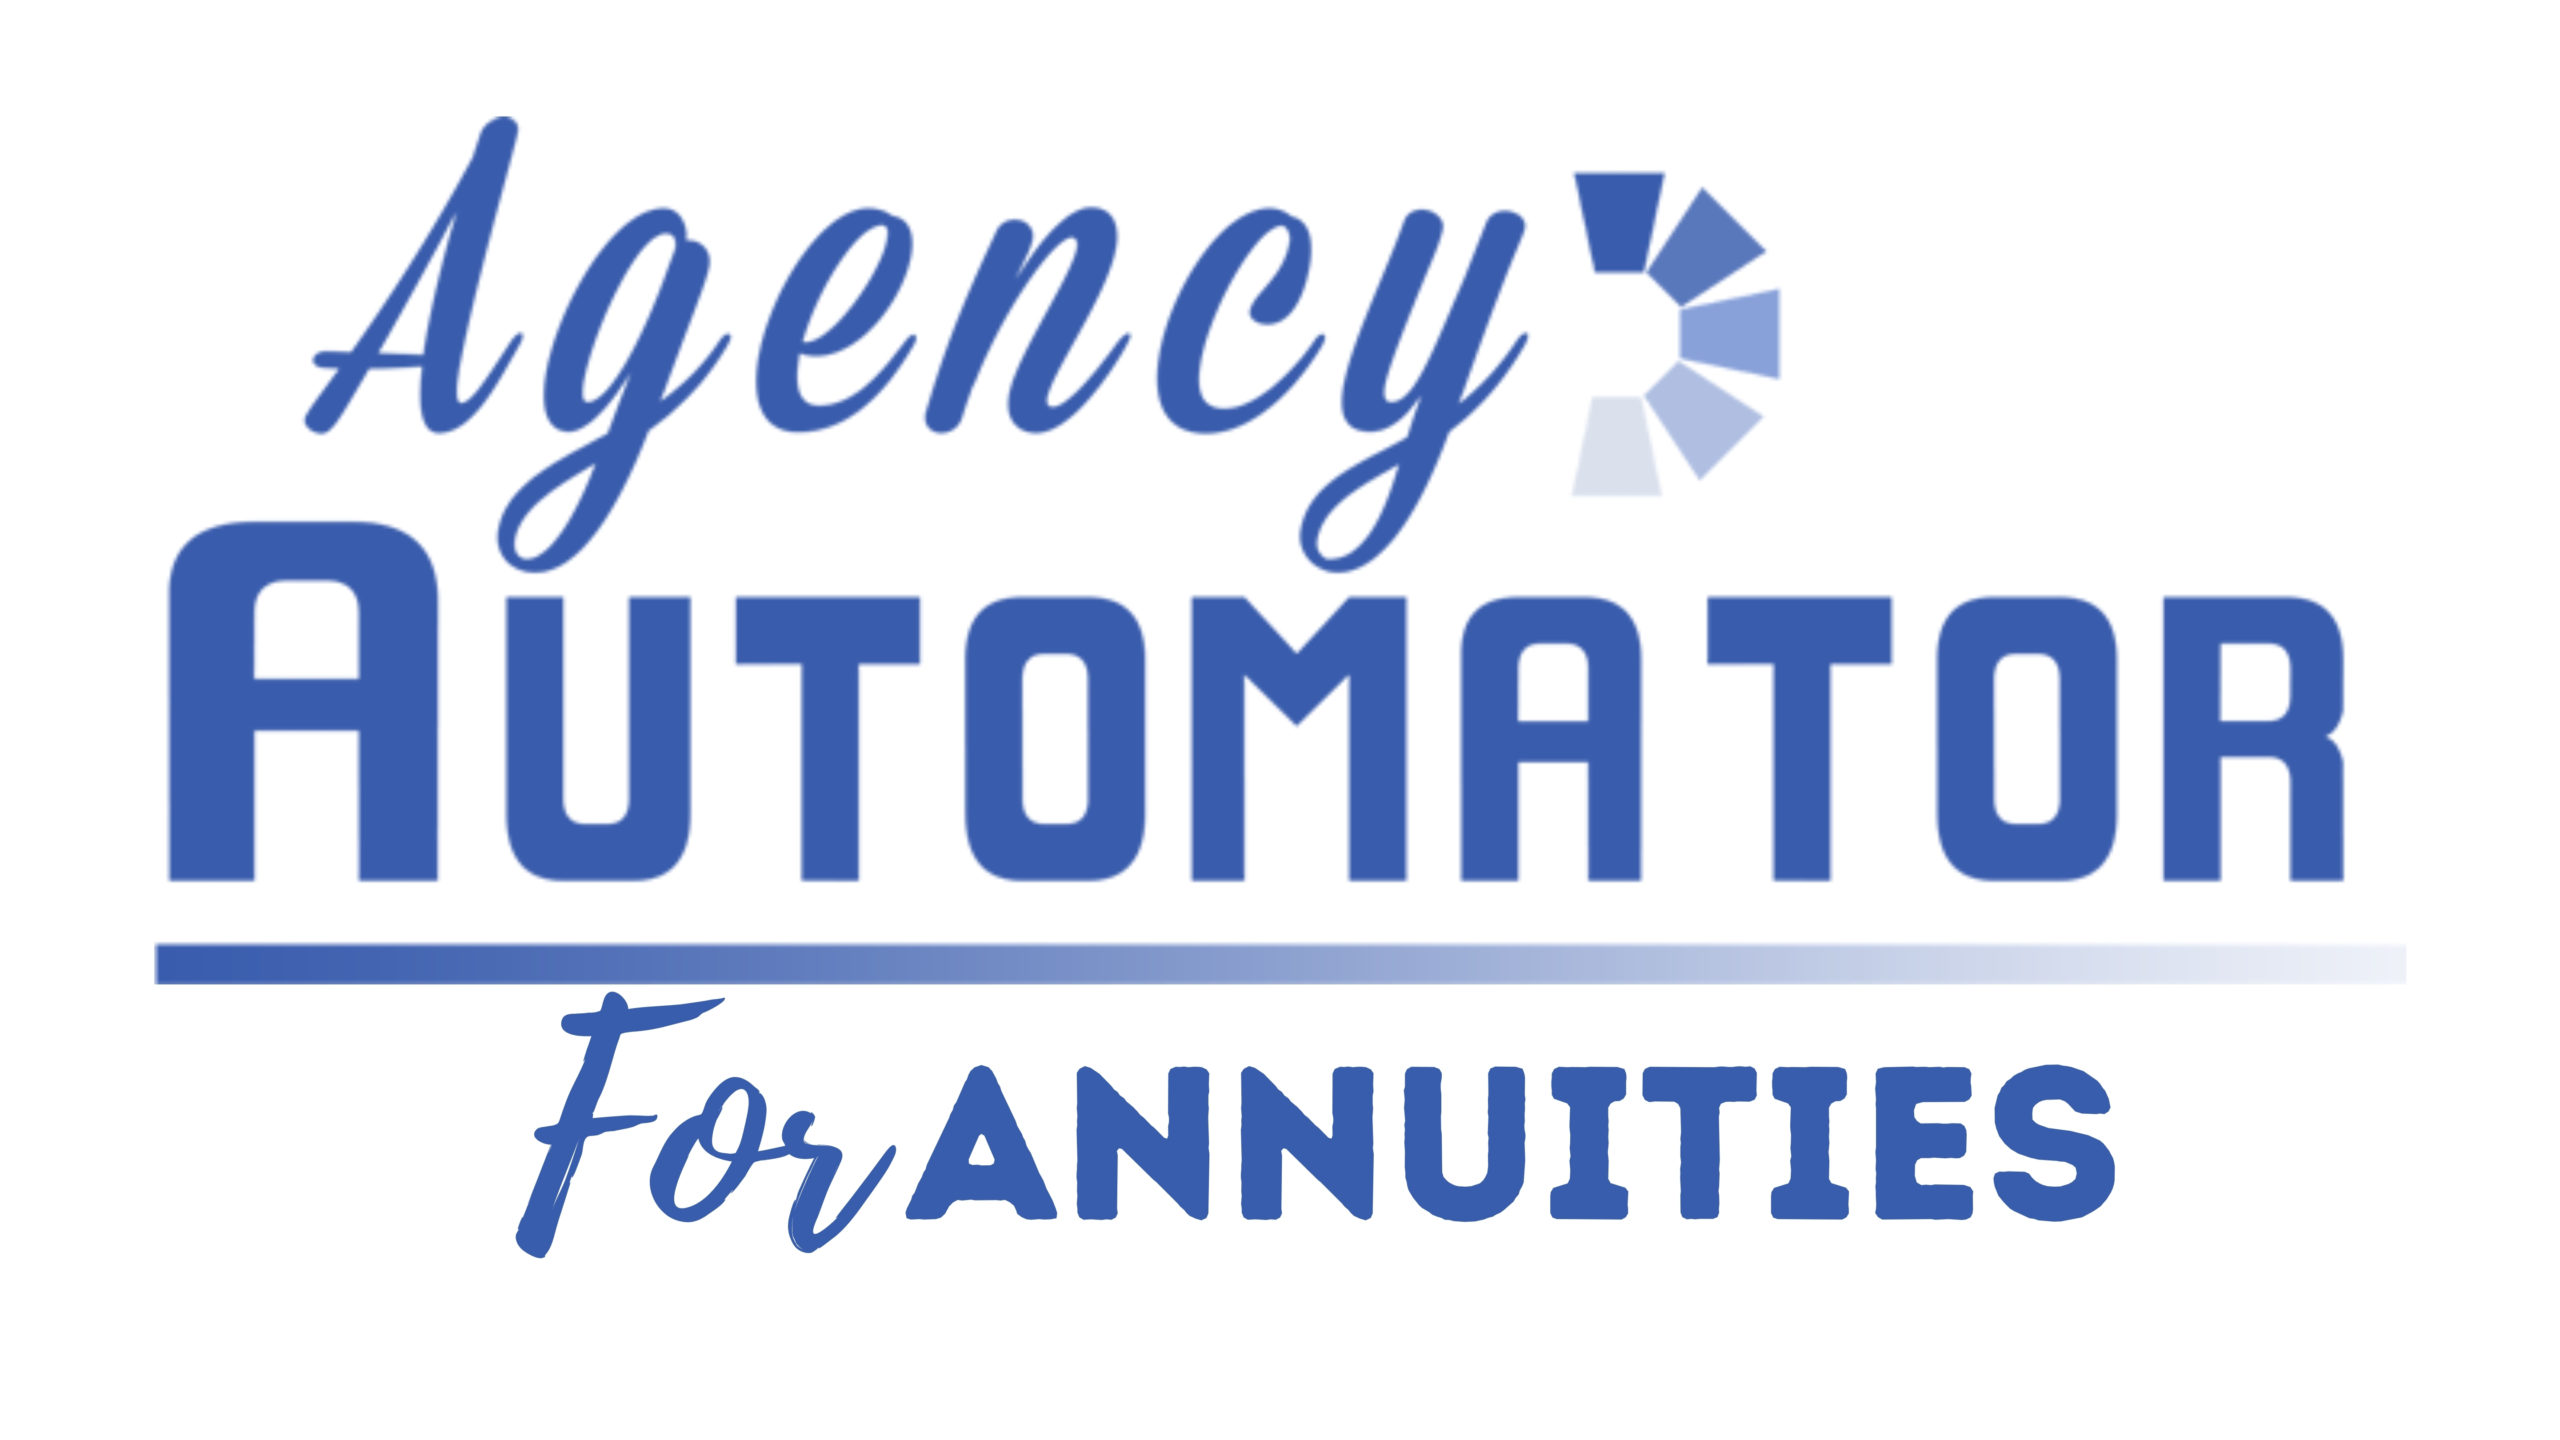 For annuity